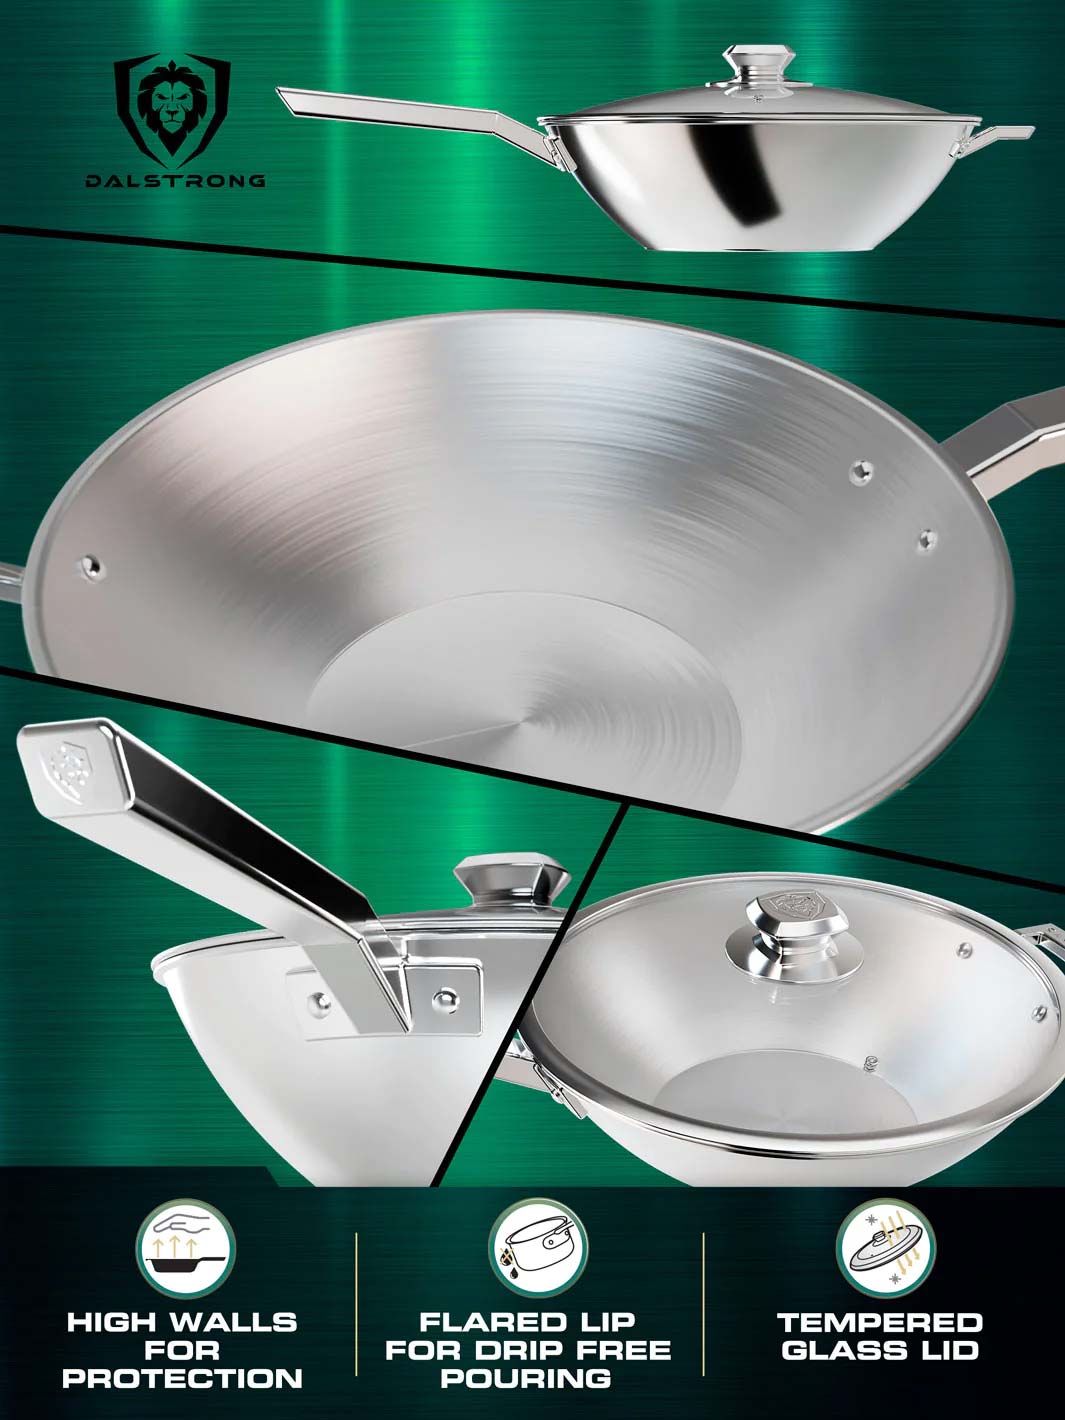 Dalstrong oberon series 12 inch frying pan wok silver showcasing it's high walls and tempered glass lid.